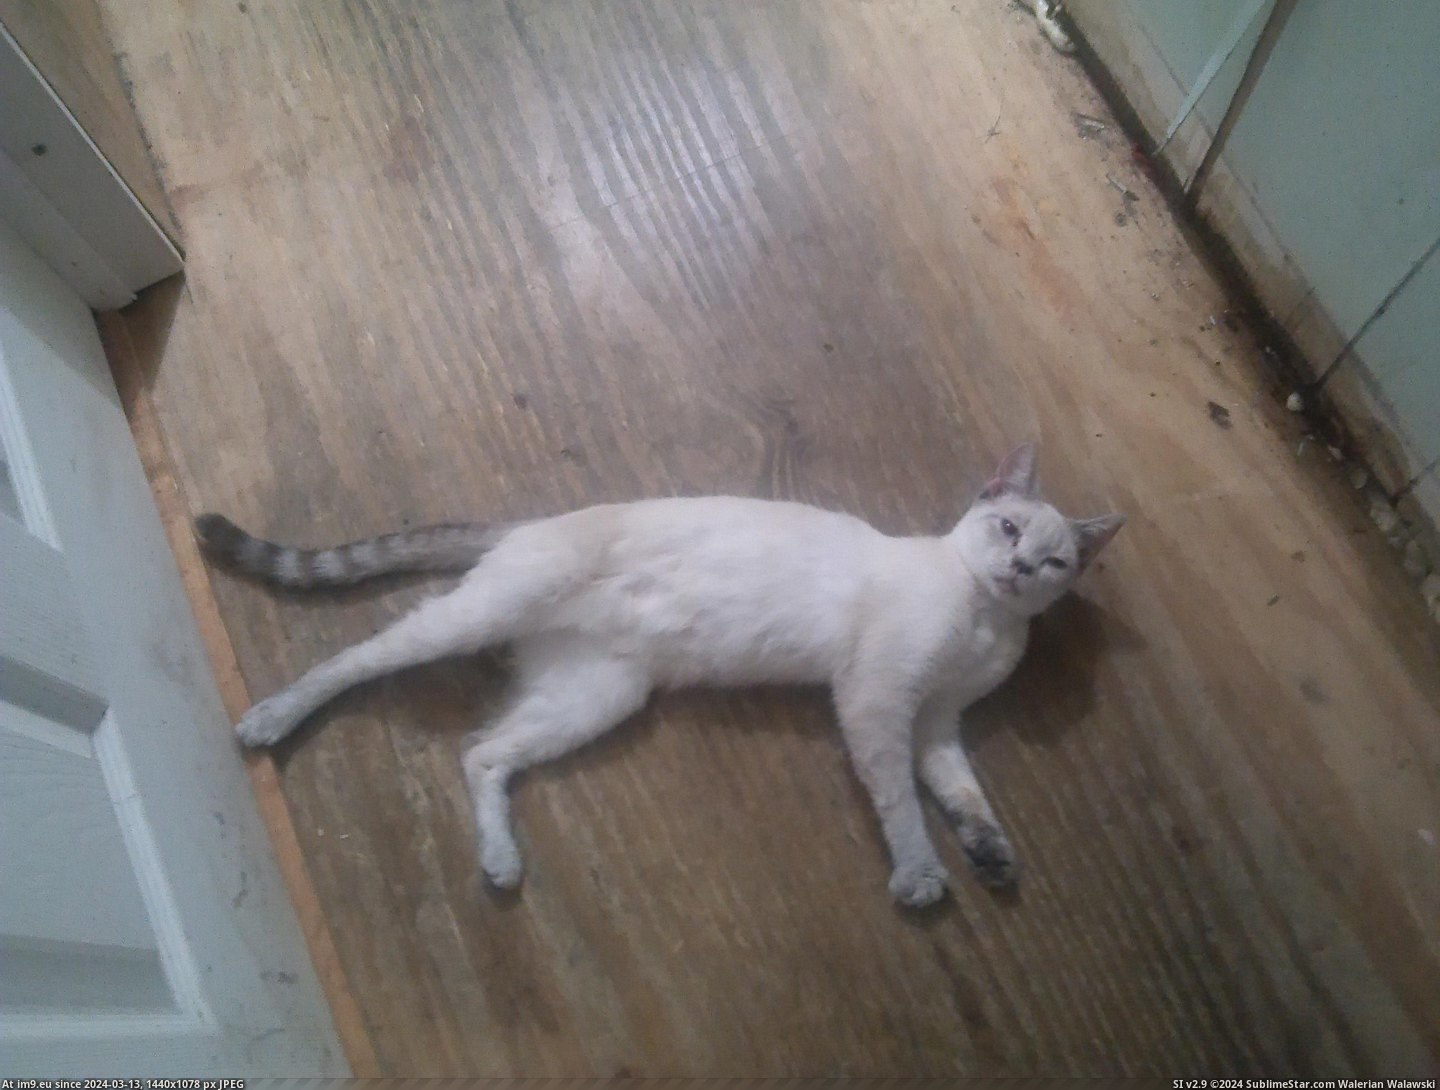 #Cats #Likes #Door #Stretching #Meowing #Sitting #Bedroom #Snowy [Cats] Snowy likes sitting outside of my bedroom door, meowing and stretching at the door until I open the door 8 Pic. (Image of album My r/CATS favs))